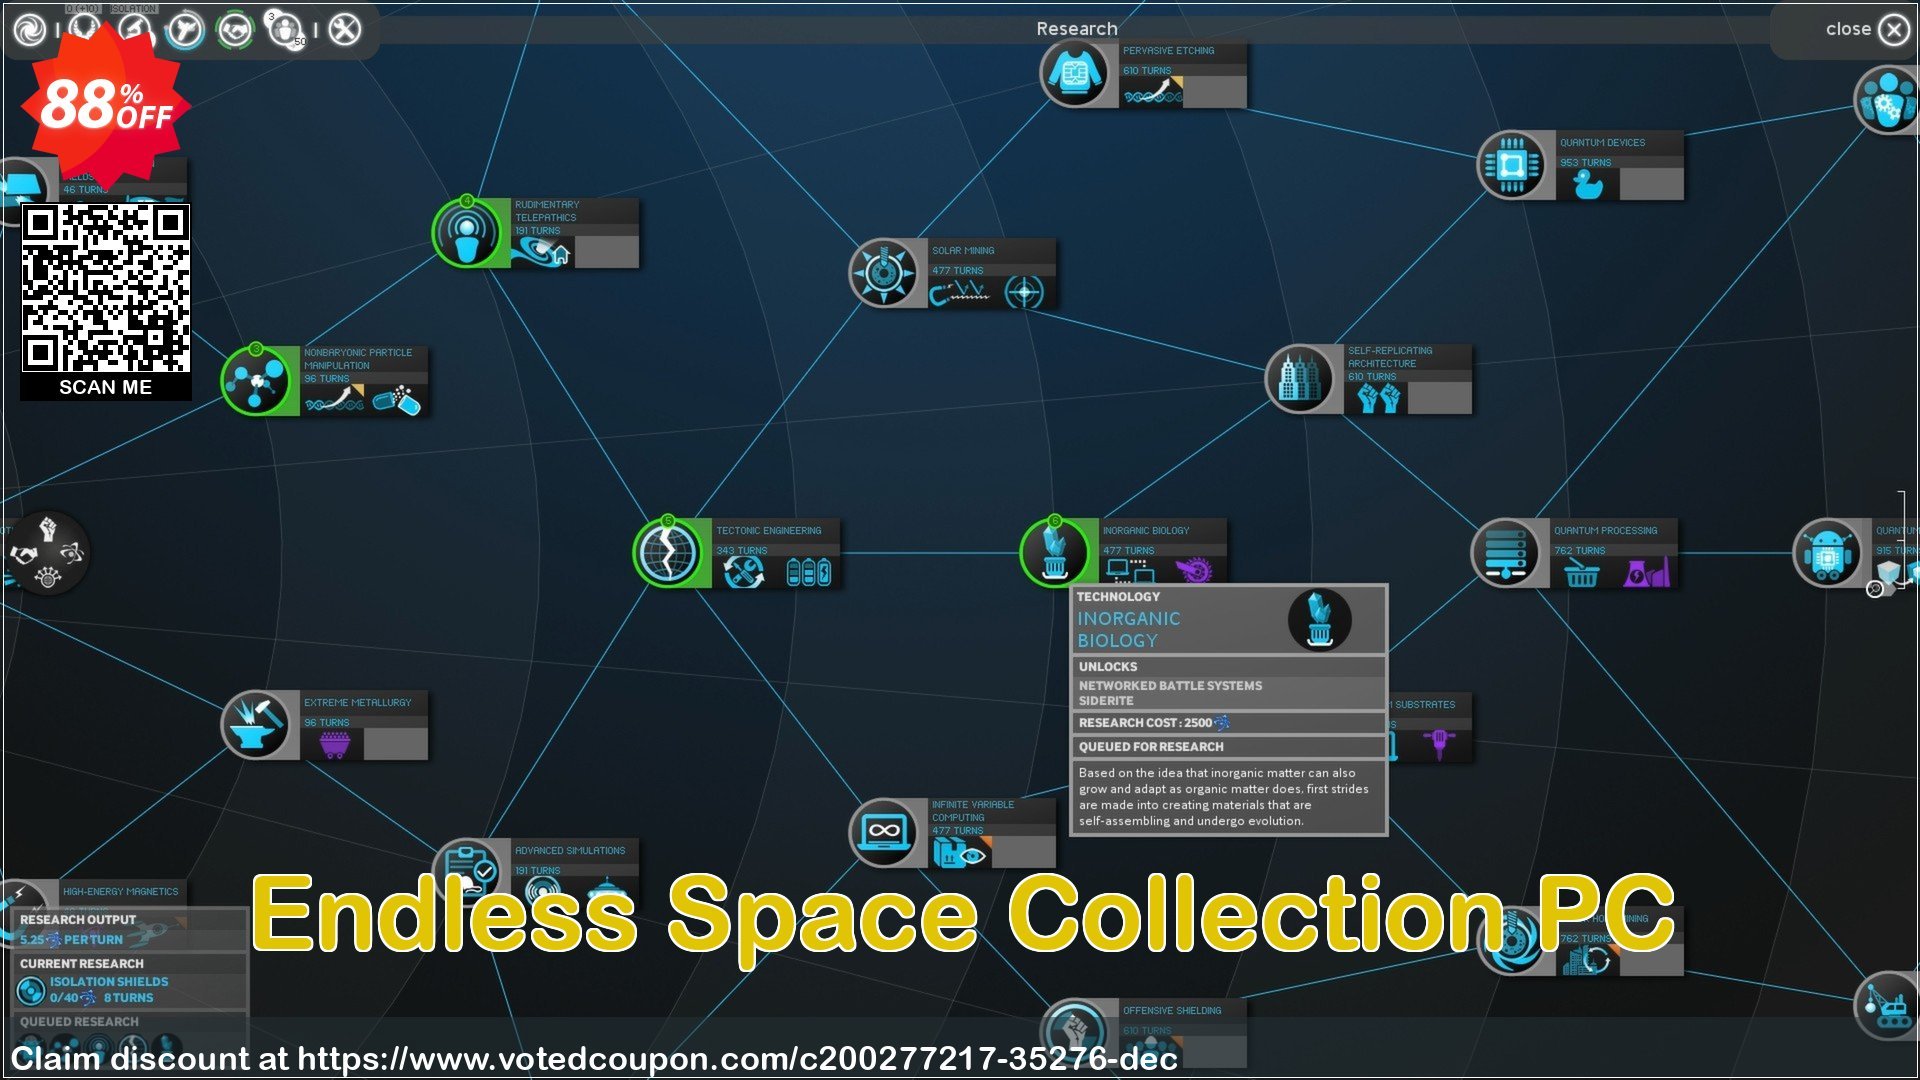 Endless Space Collection PC Coupon Code Apr 2024, 88% OFF - VotedCoupon